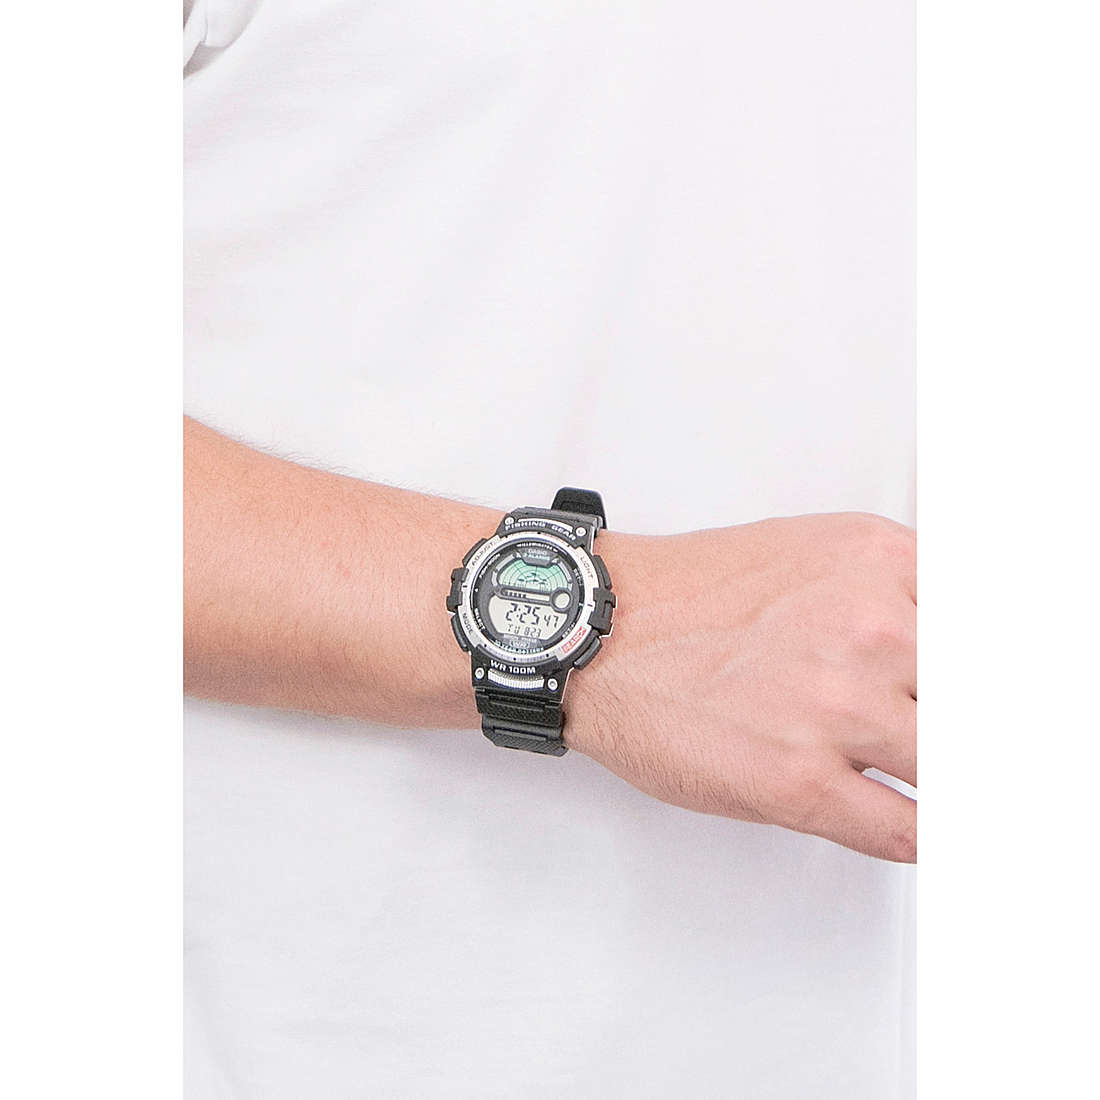 Casio multifunction Collection man WS-1200H-1AVEF wearing